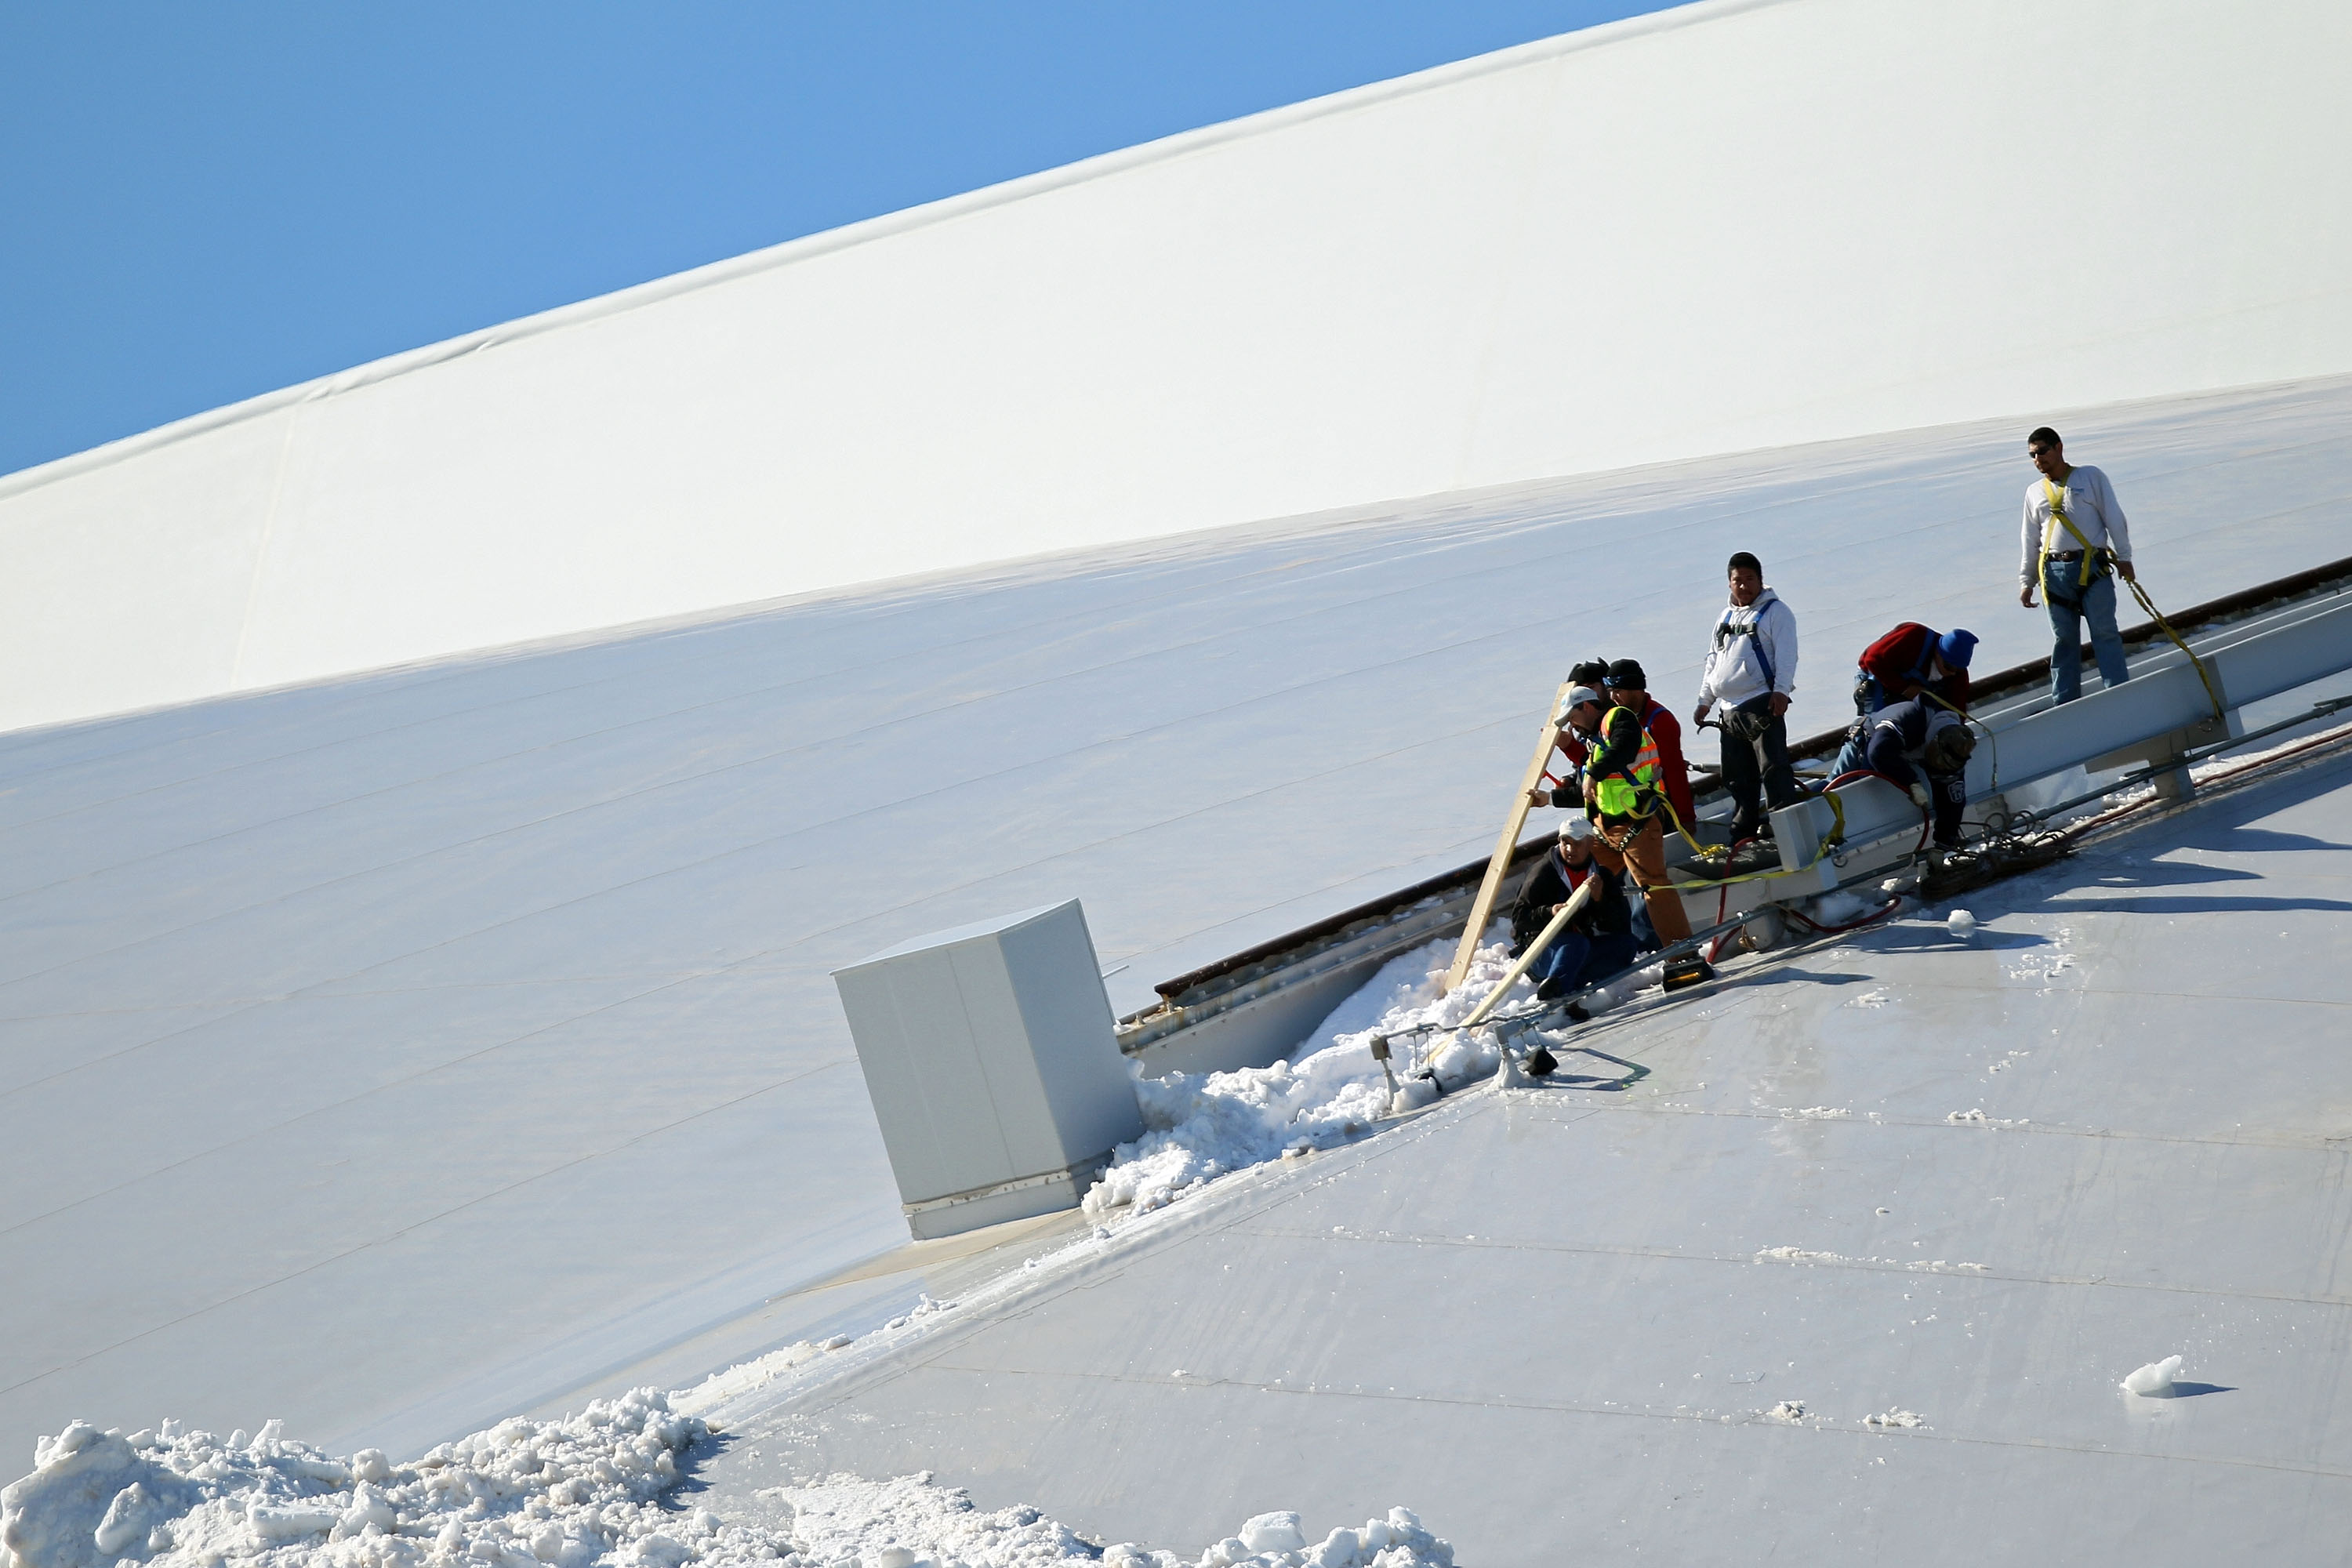 ARLINGTON, TX - FEBRUARY 05:  Workers clear ice and snow from atop Cowboys Stadium on February 5, 2011 in Arlington, Texas.  According to reports, at least six people were injured yesterday when large sheets of ice fell some 200 feet from the dome of the